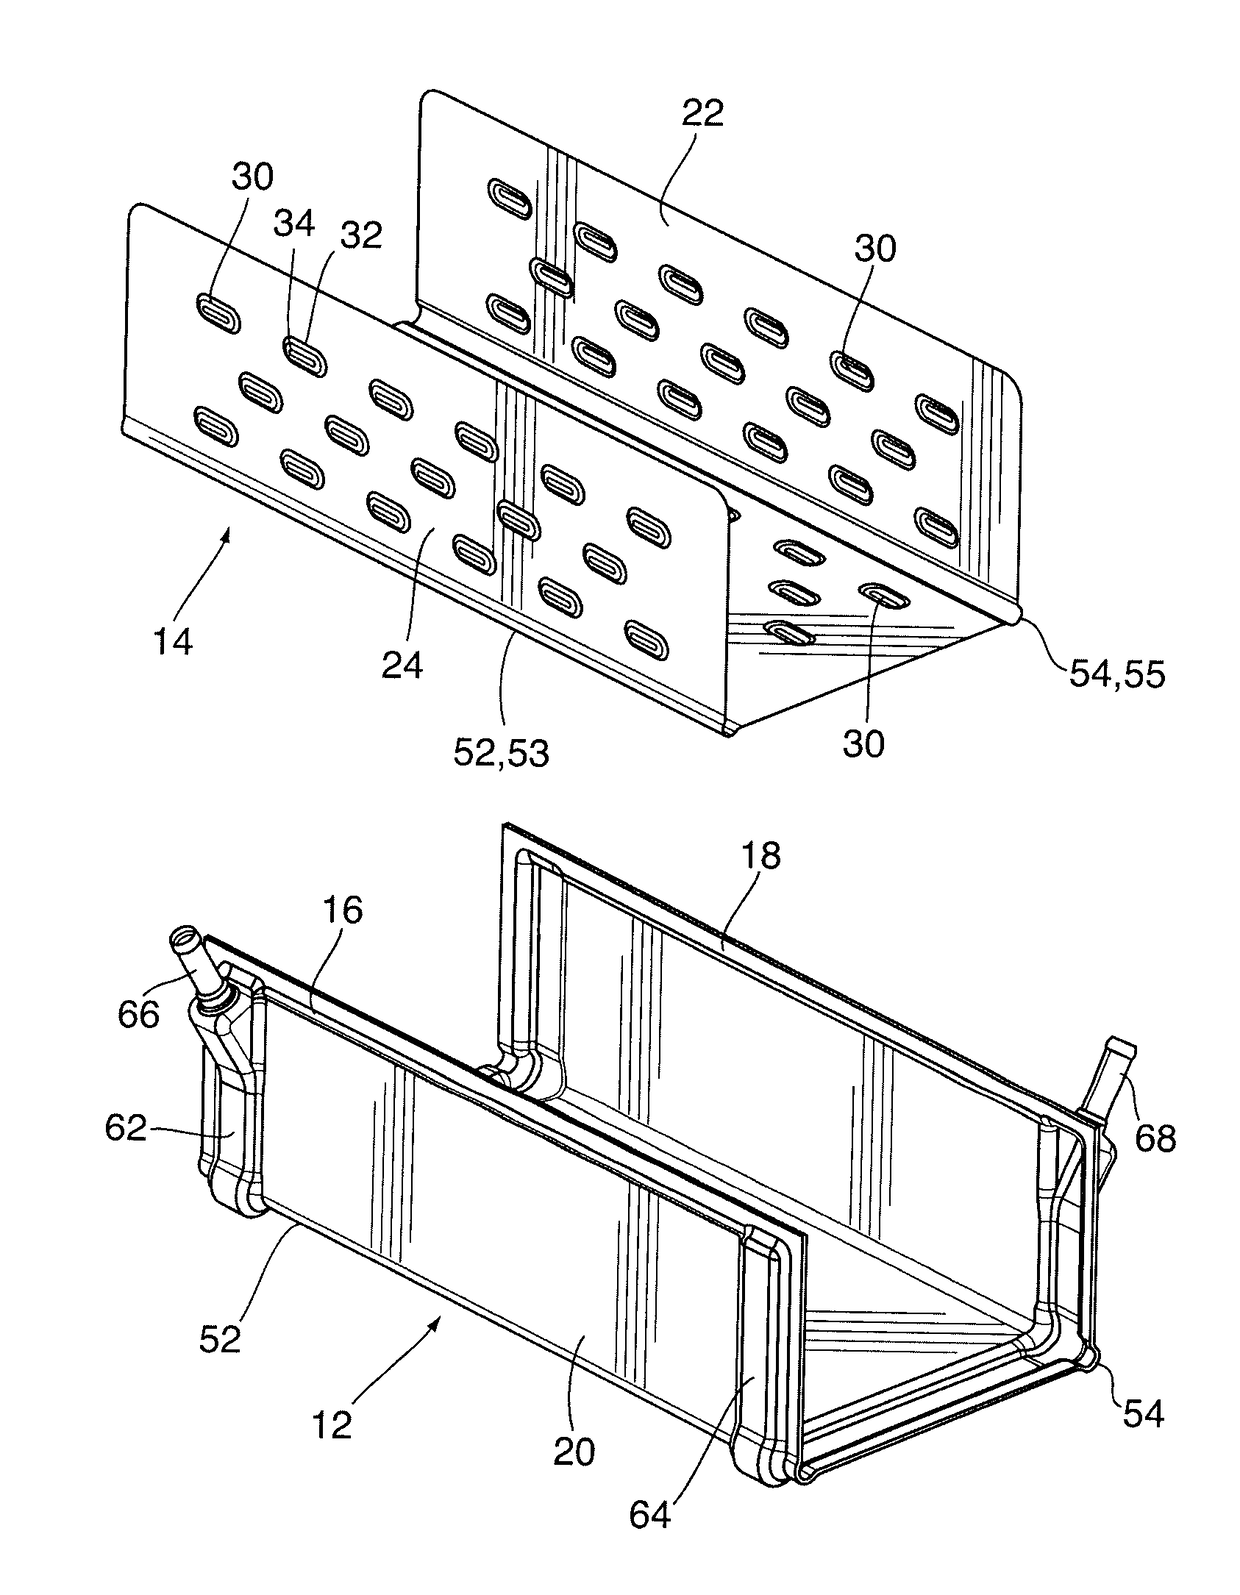 Multi-sided heat exchangers with compliant heat transfer surfaces